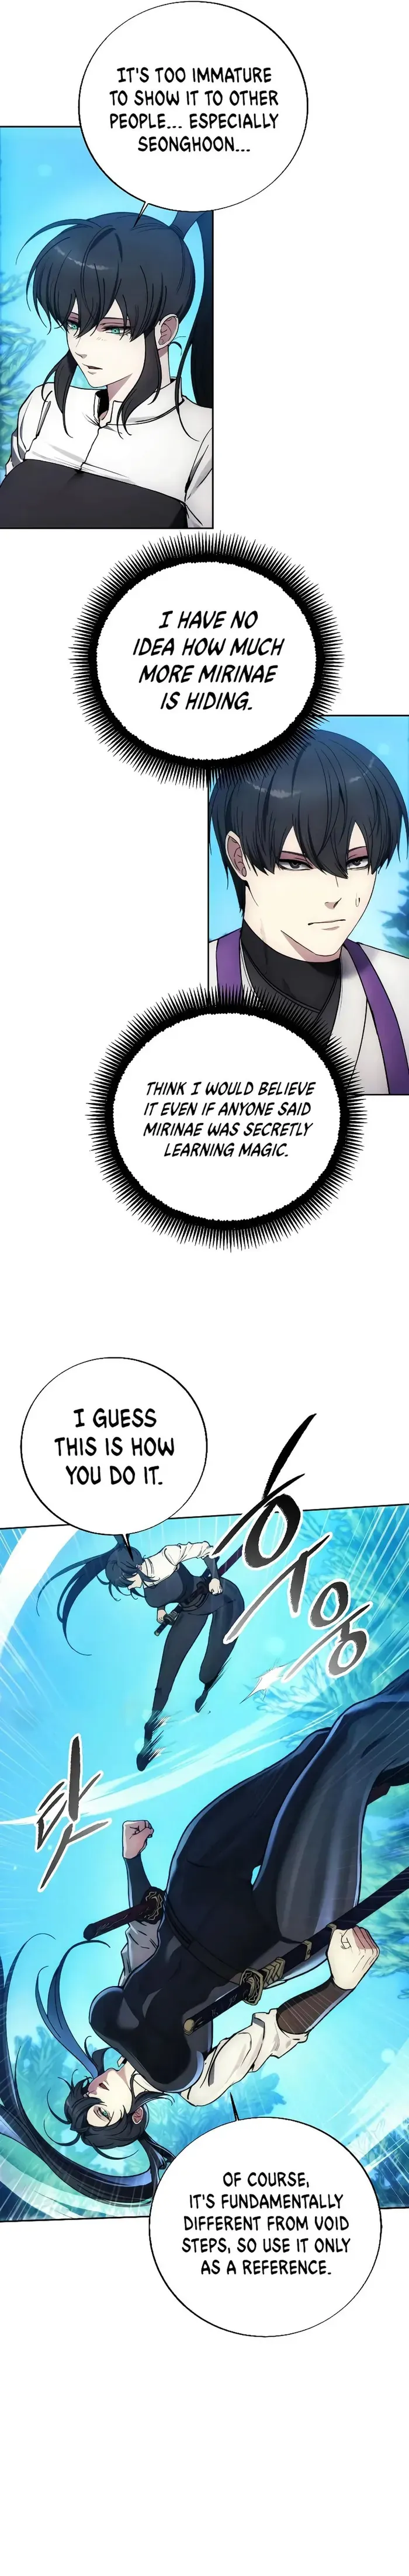 How to Live as a Villain Chapter 129 page 9